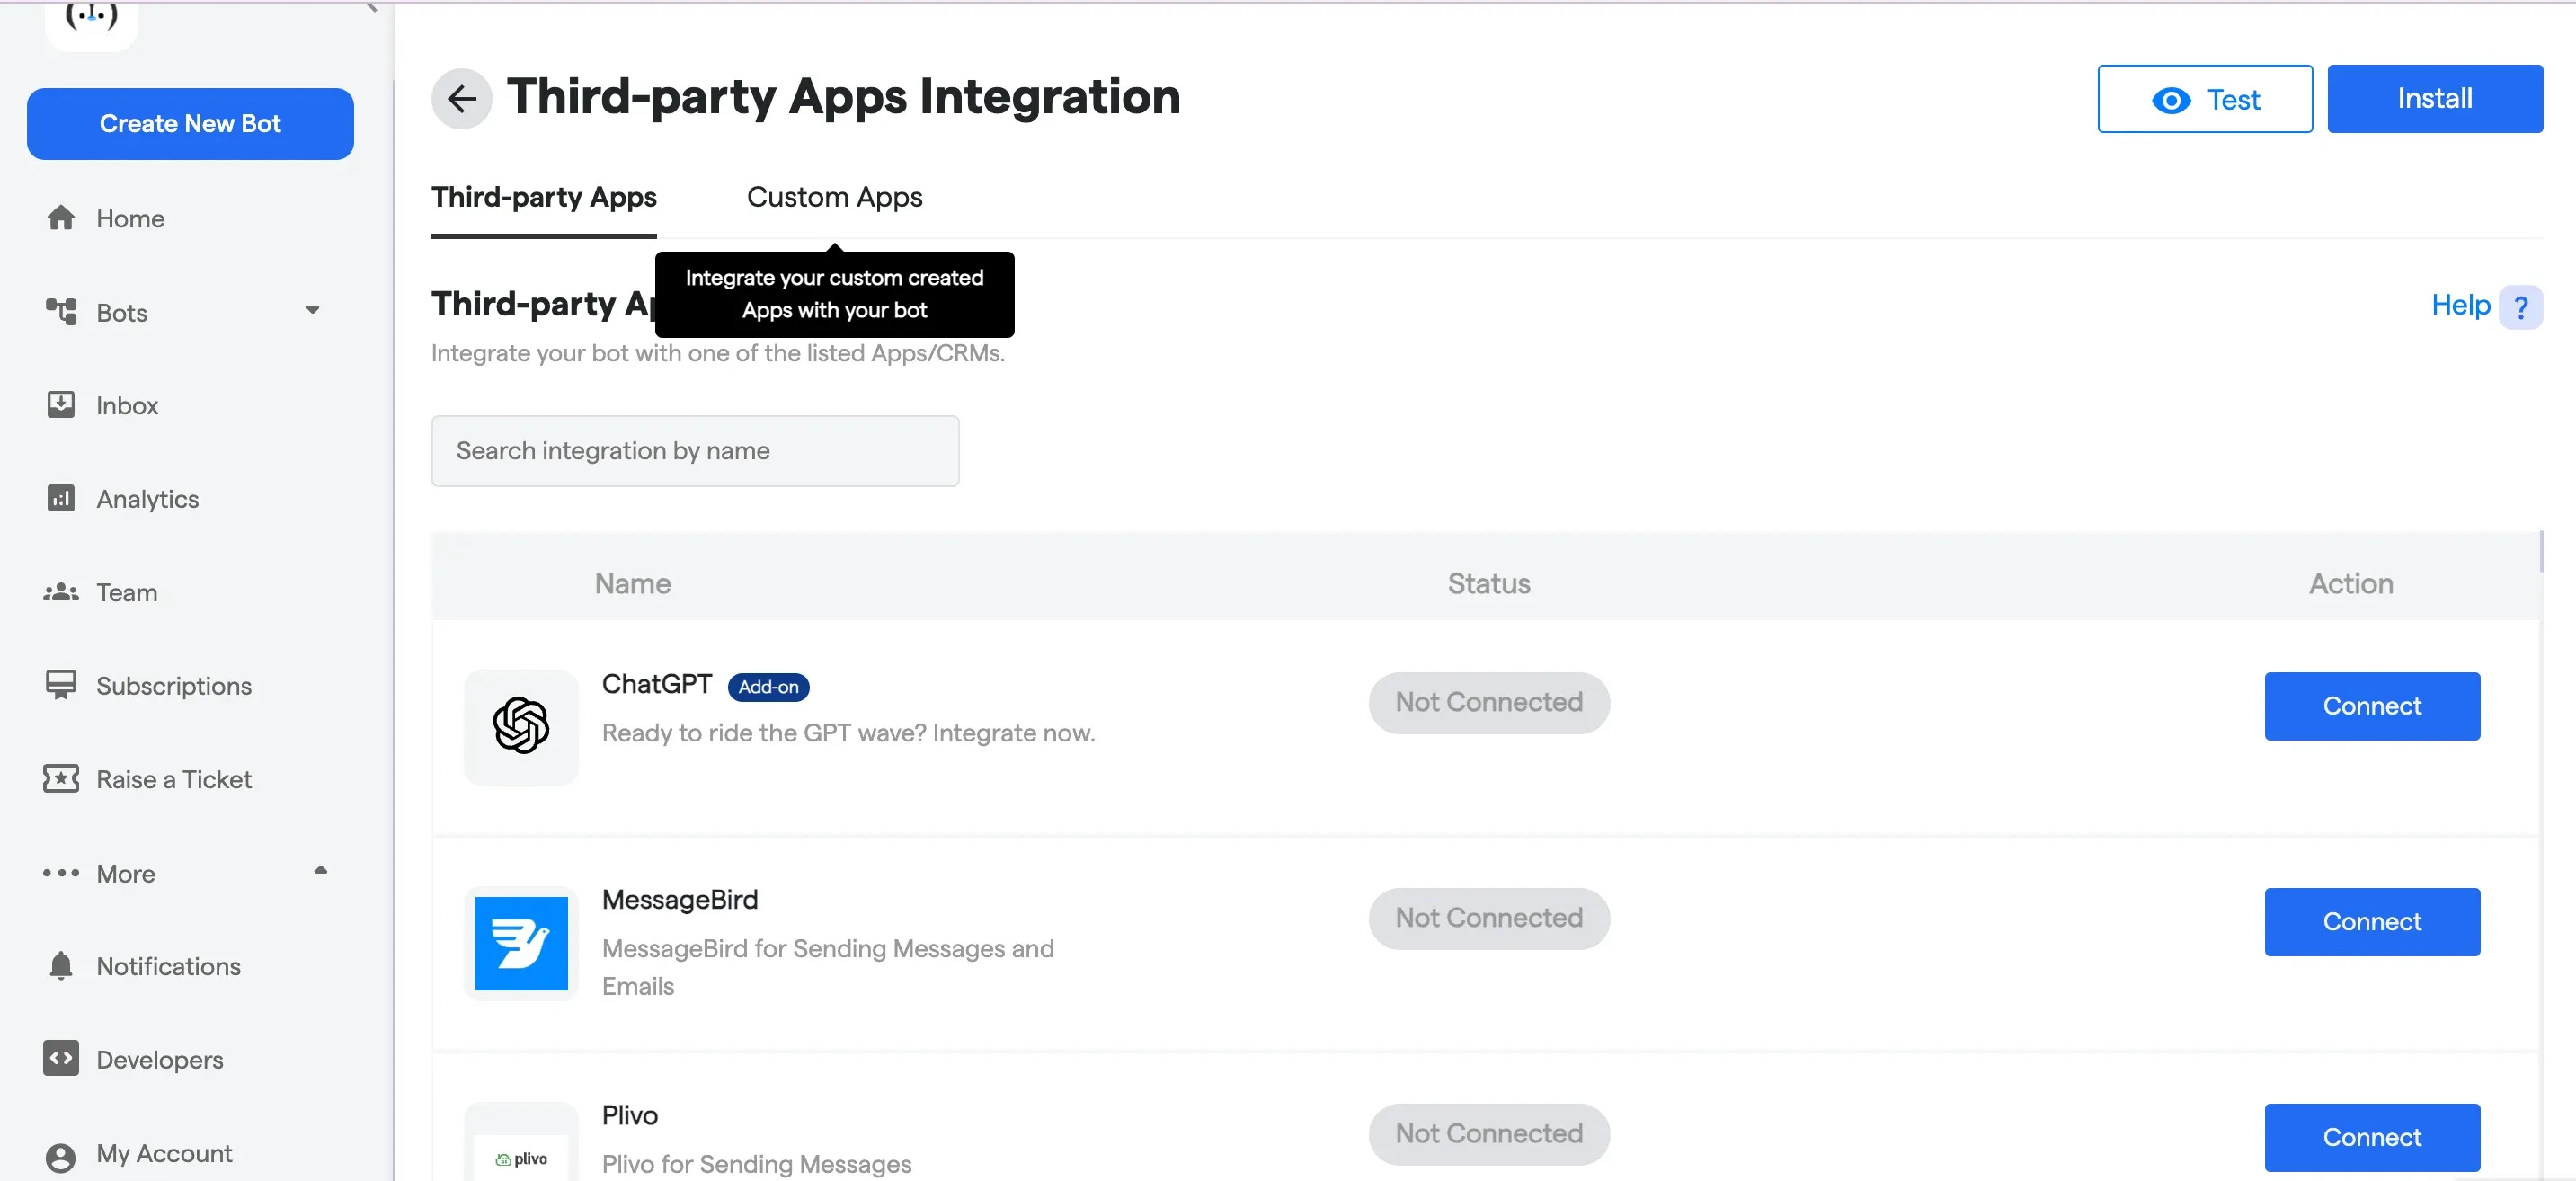 Choose from 60+ native integrations